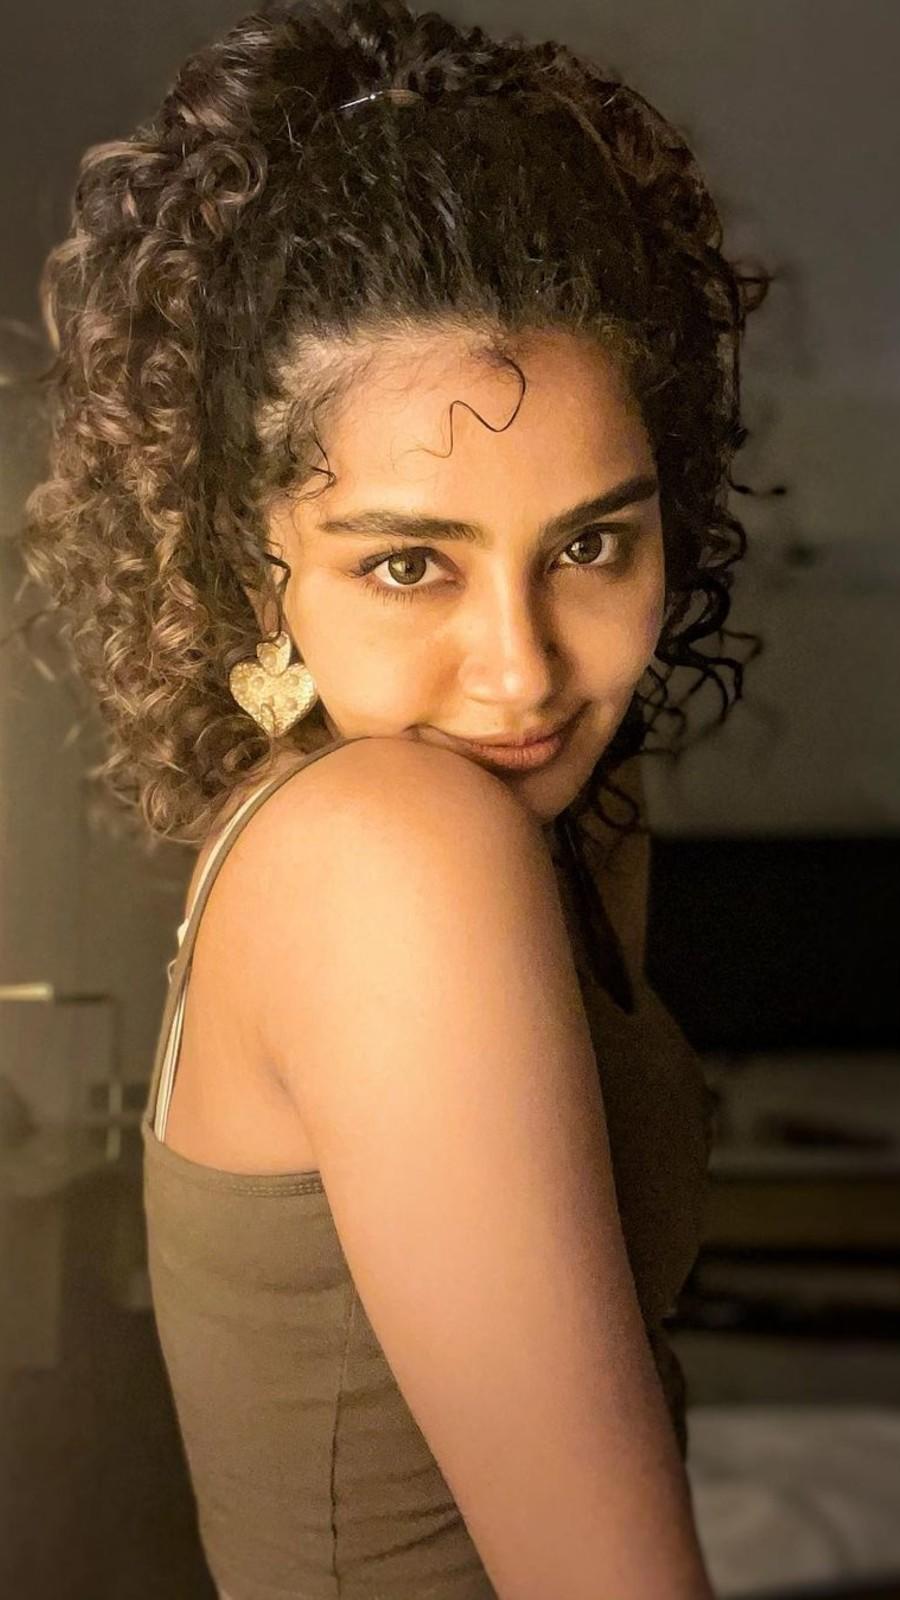 Curly haired beauties of Tollywood | Times of India